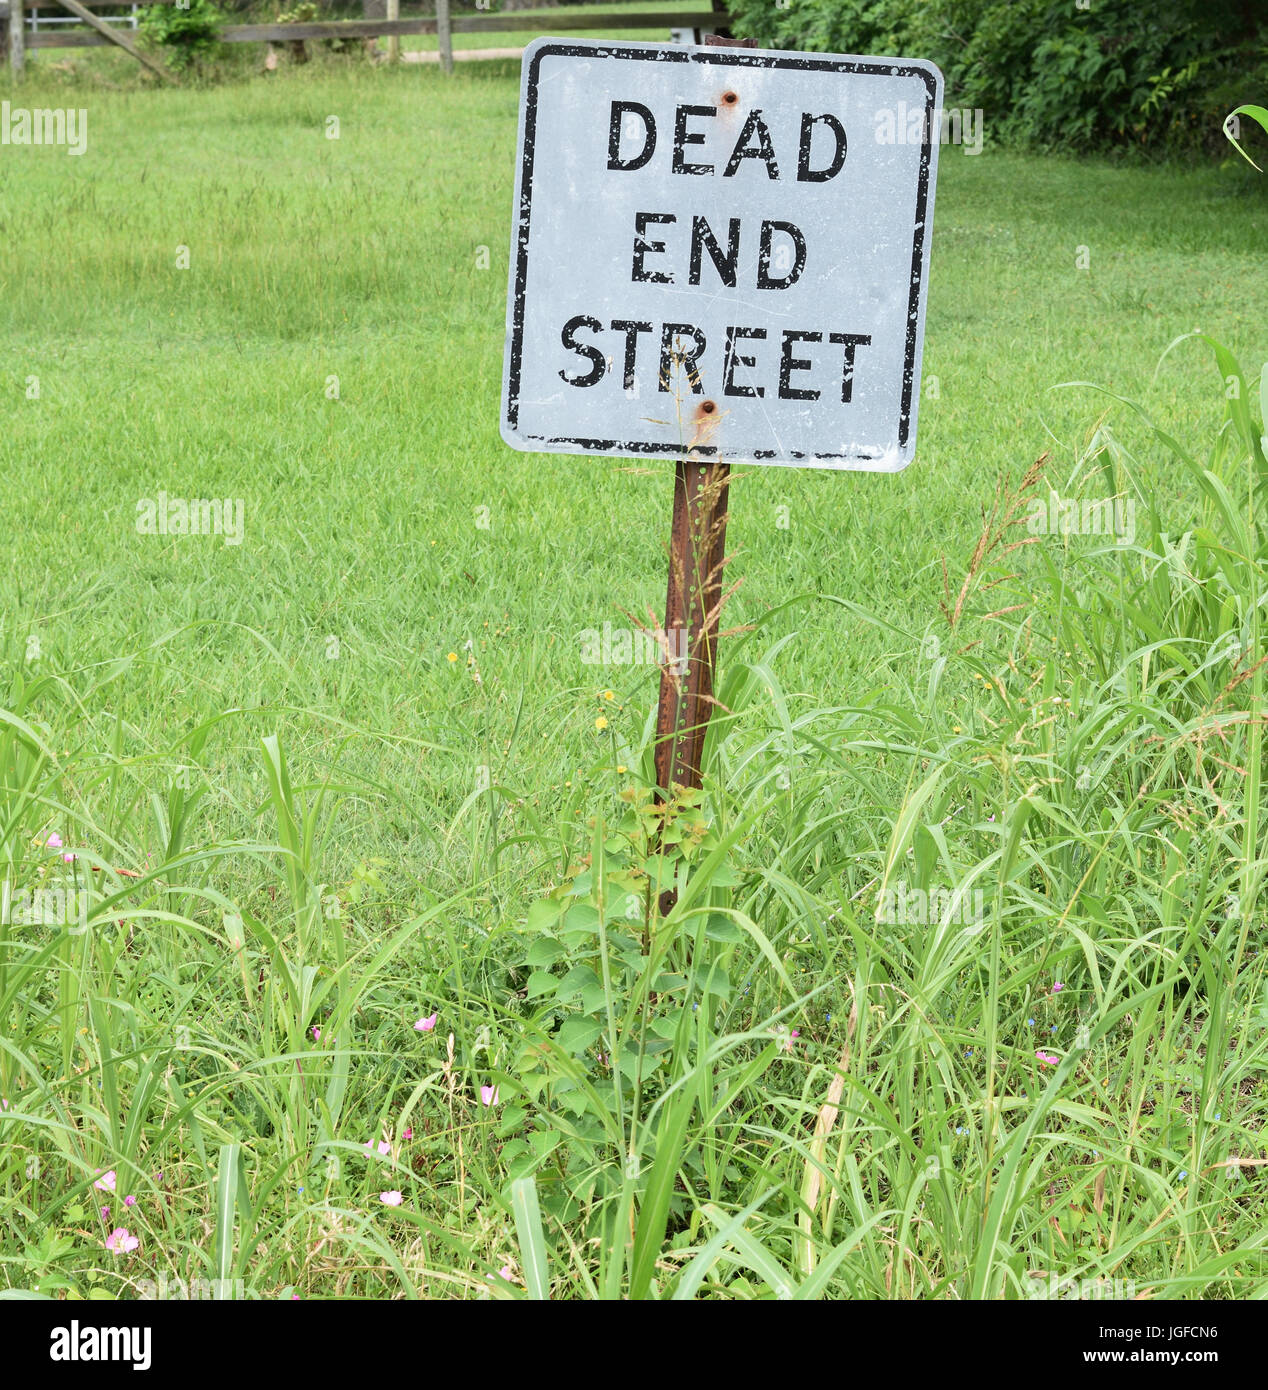 Unique dead end street sign in a field Stock Photo